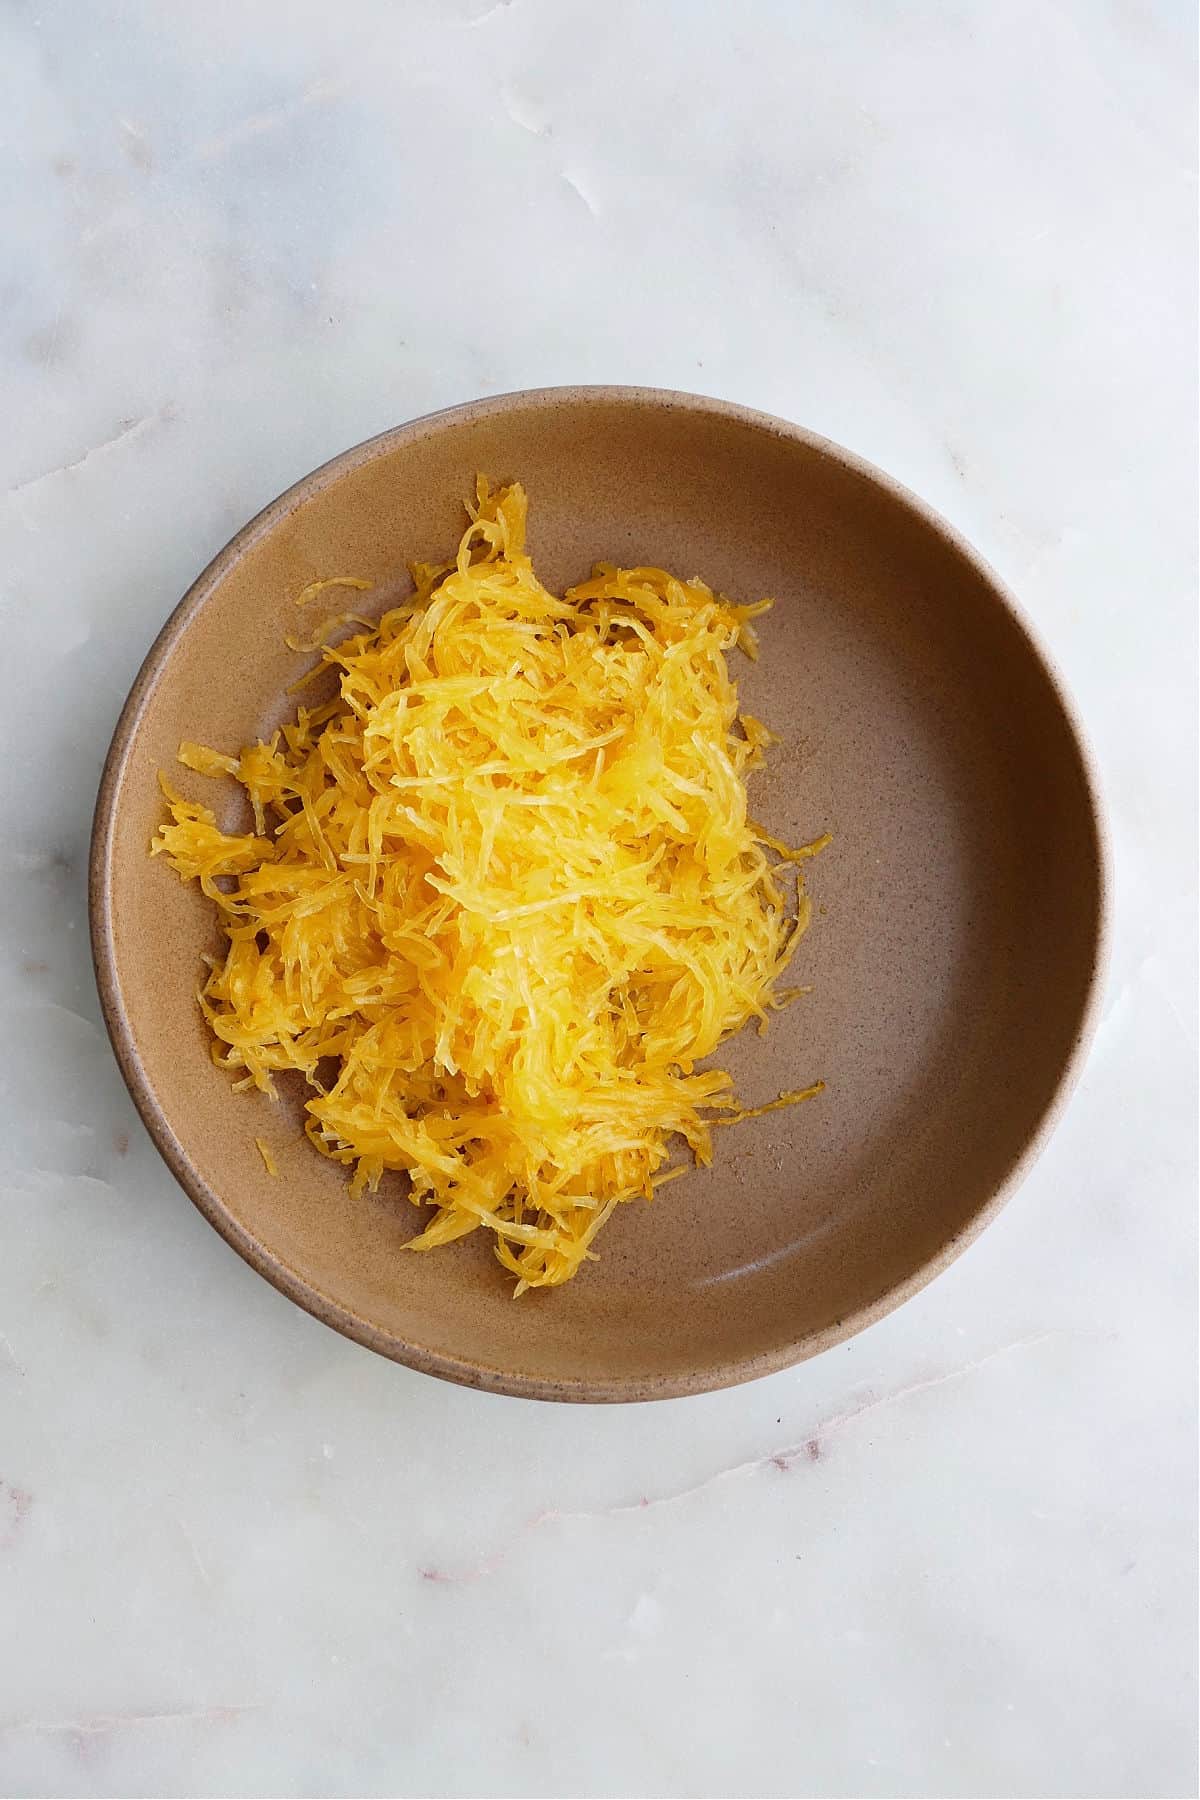 spaghetti squash noodles in a brown serving bowl on a counter